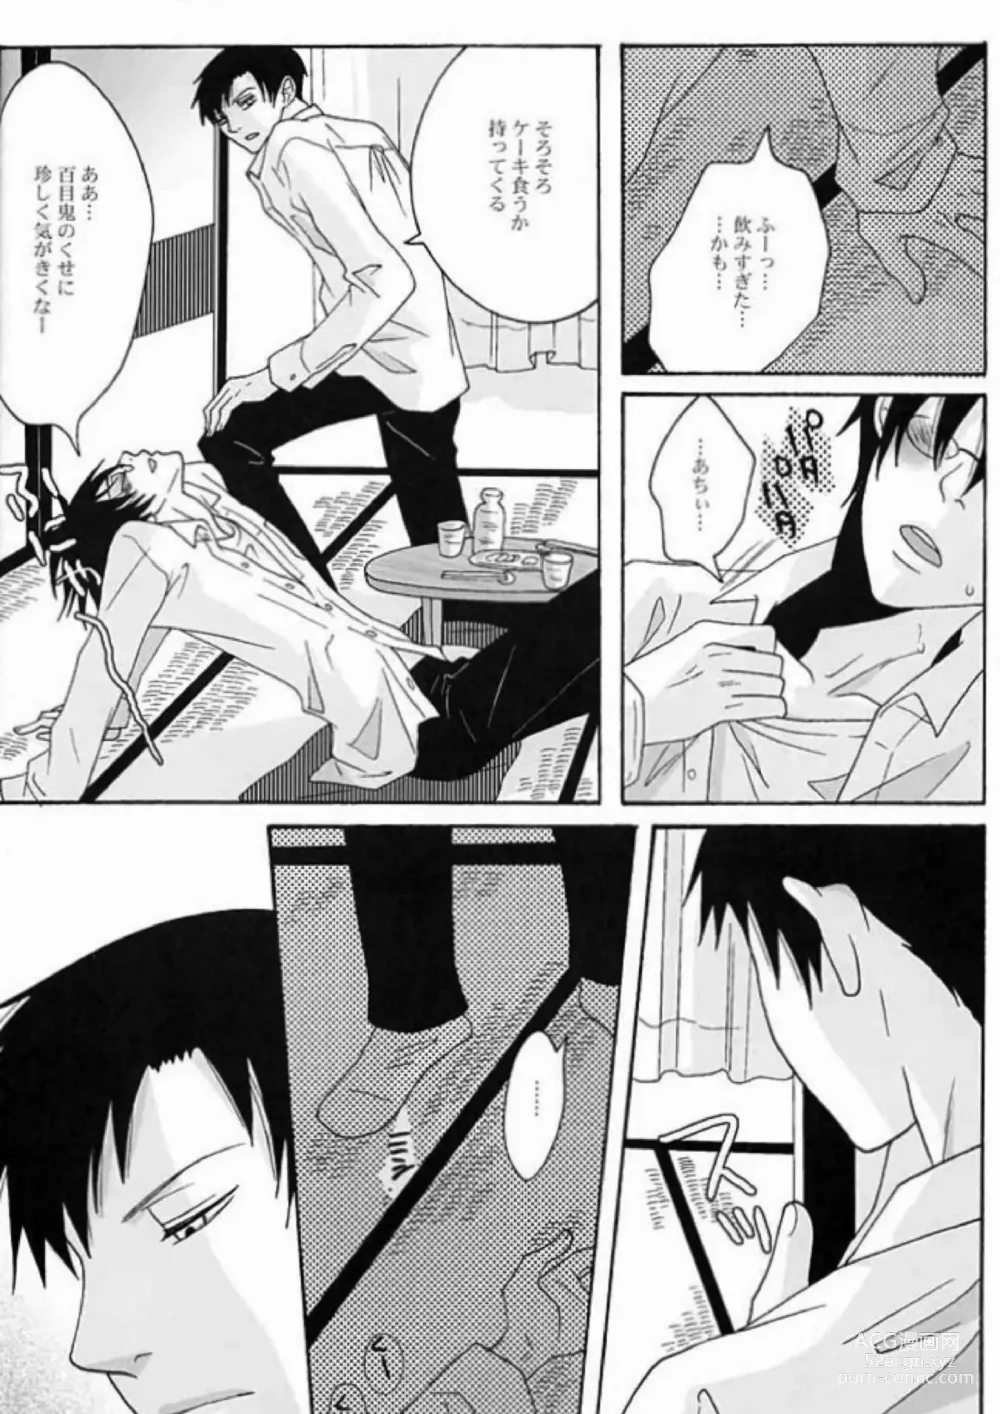 Page 7 of doujinshi PARTY LOVE 104 LIFE!